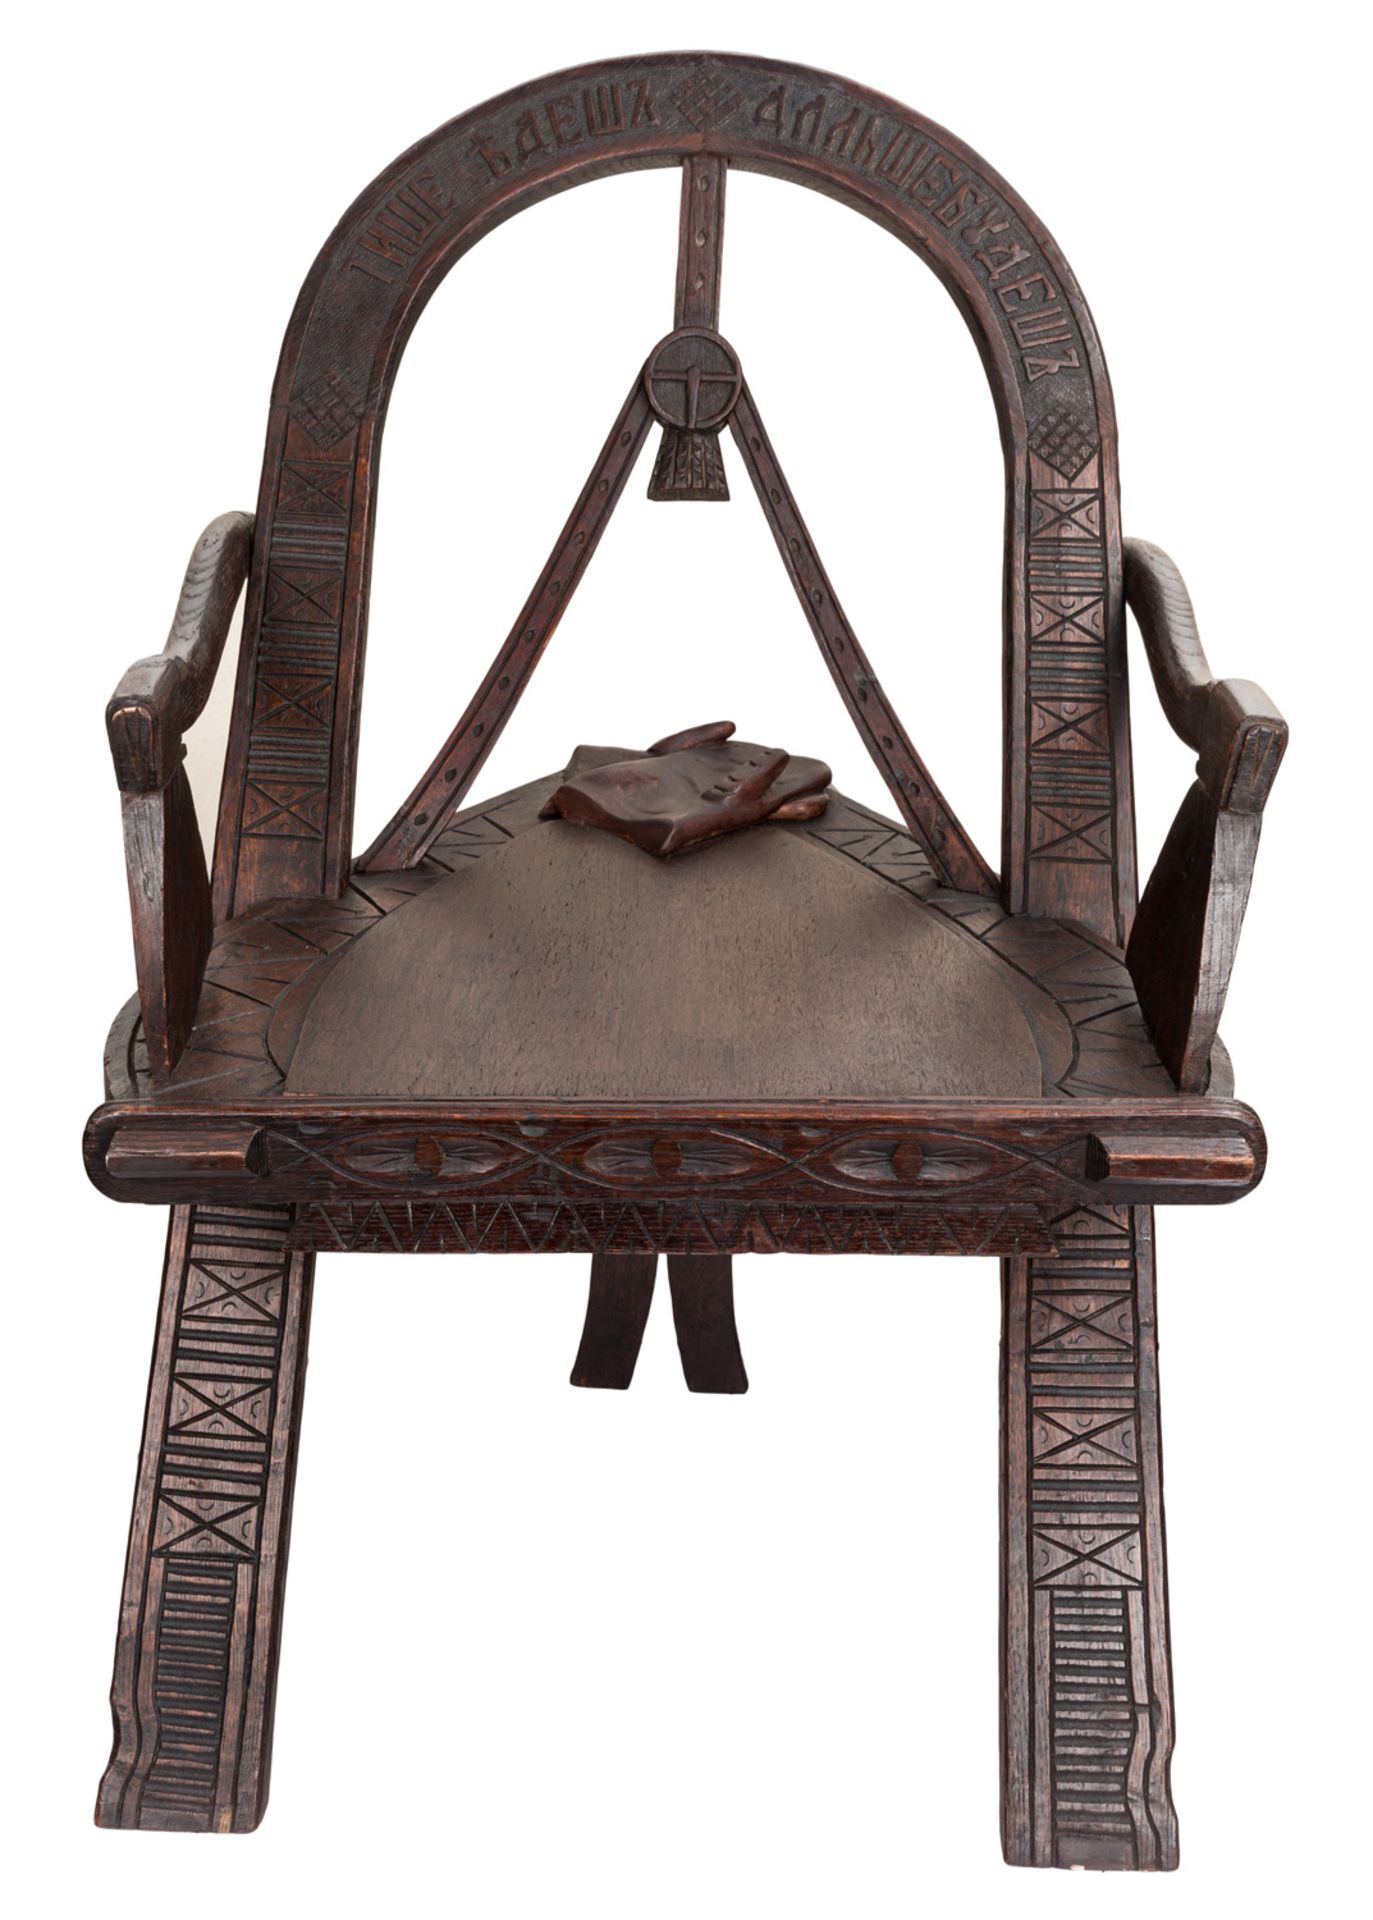 A RUSSIAN CARVED OAK CHAIR AFTER THE DESIGN BY VASILI PETROVICH SHUTOV (RUSSIAN 1826-1887)19TH CENT. - Bild 2 aus 3